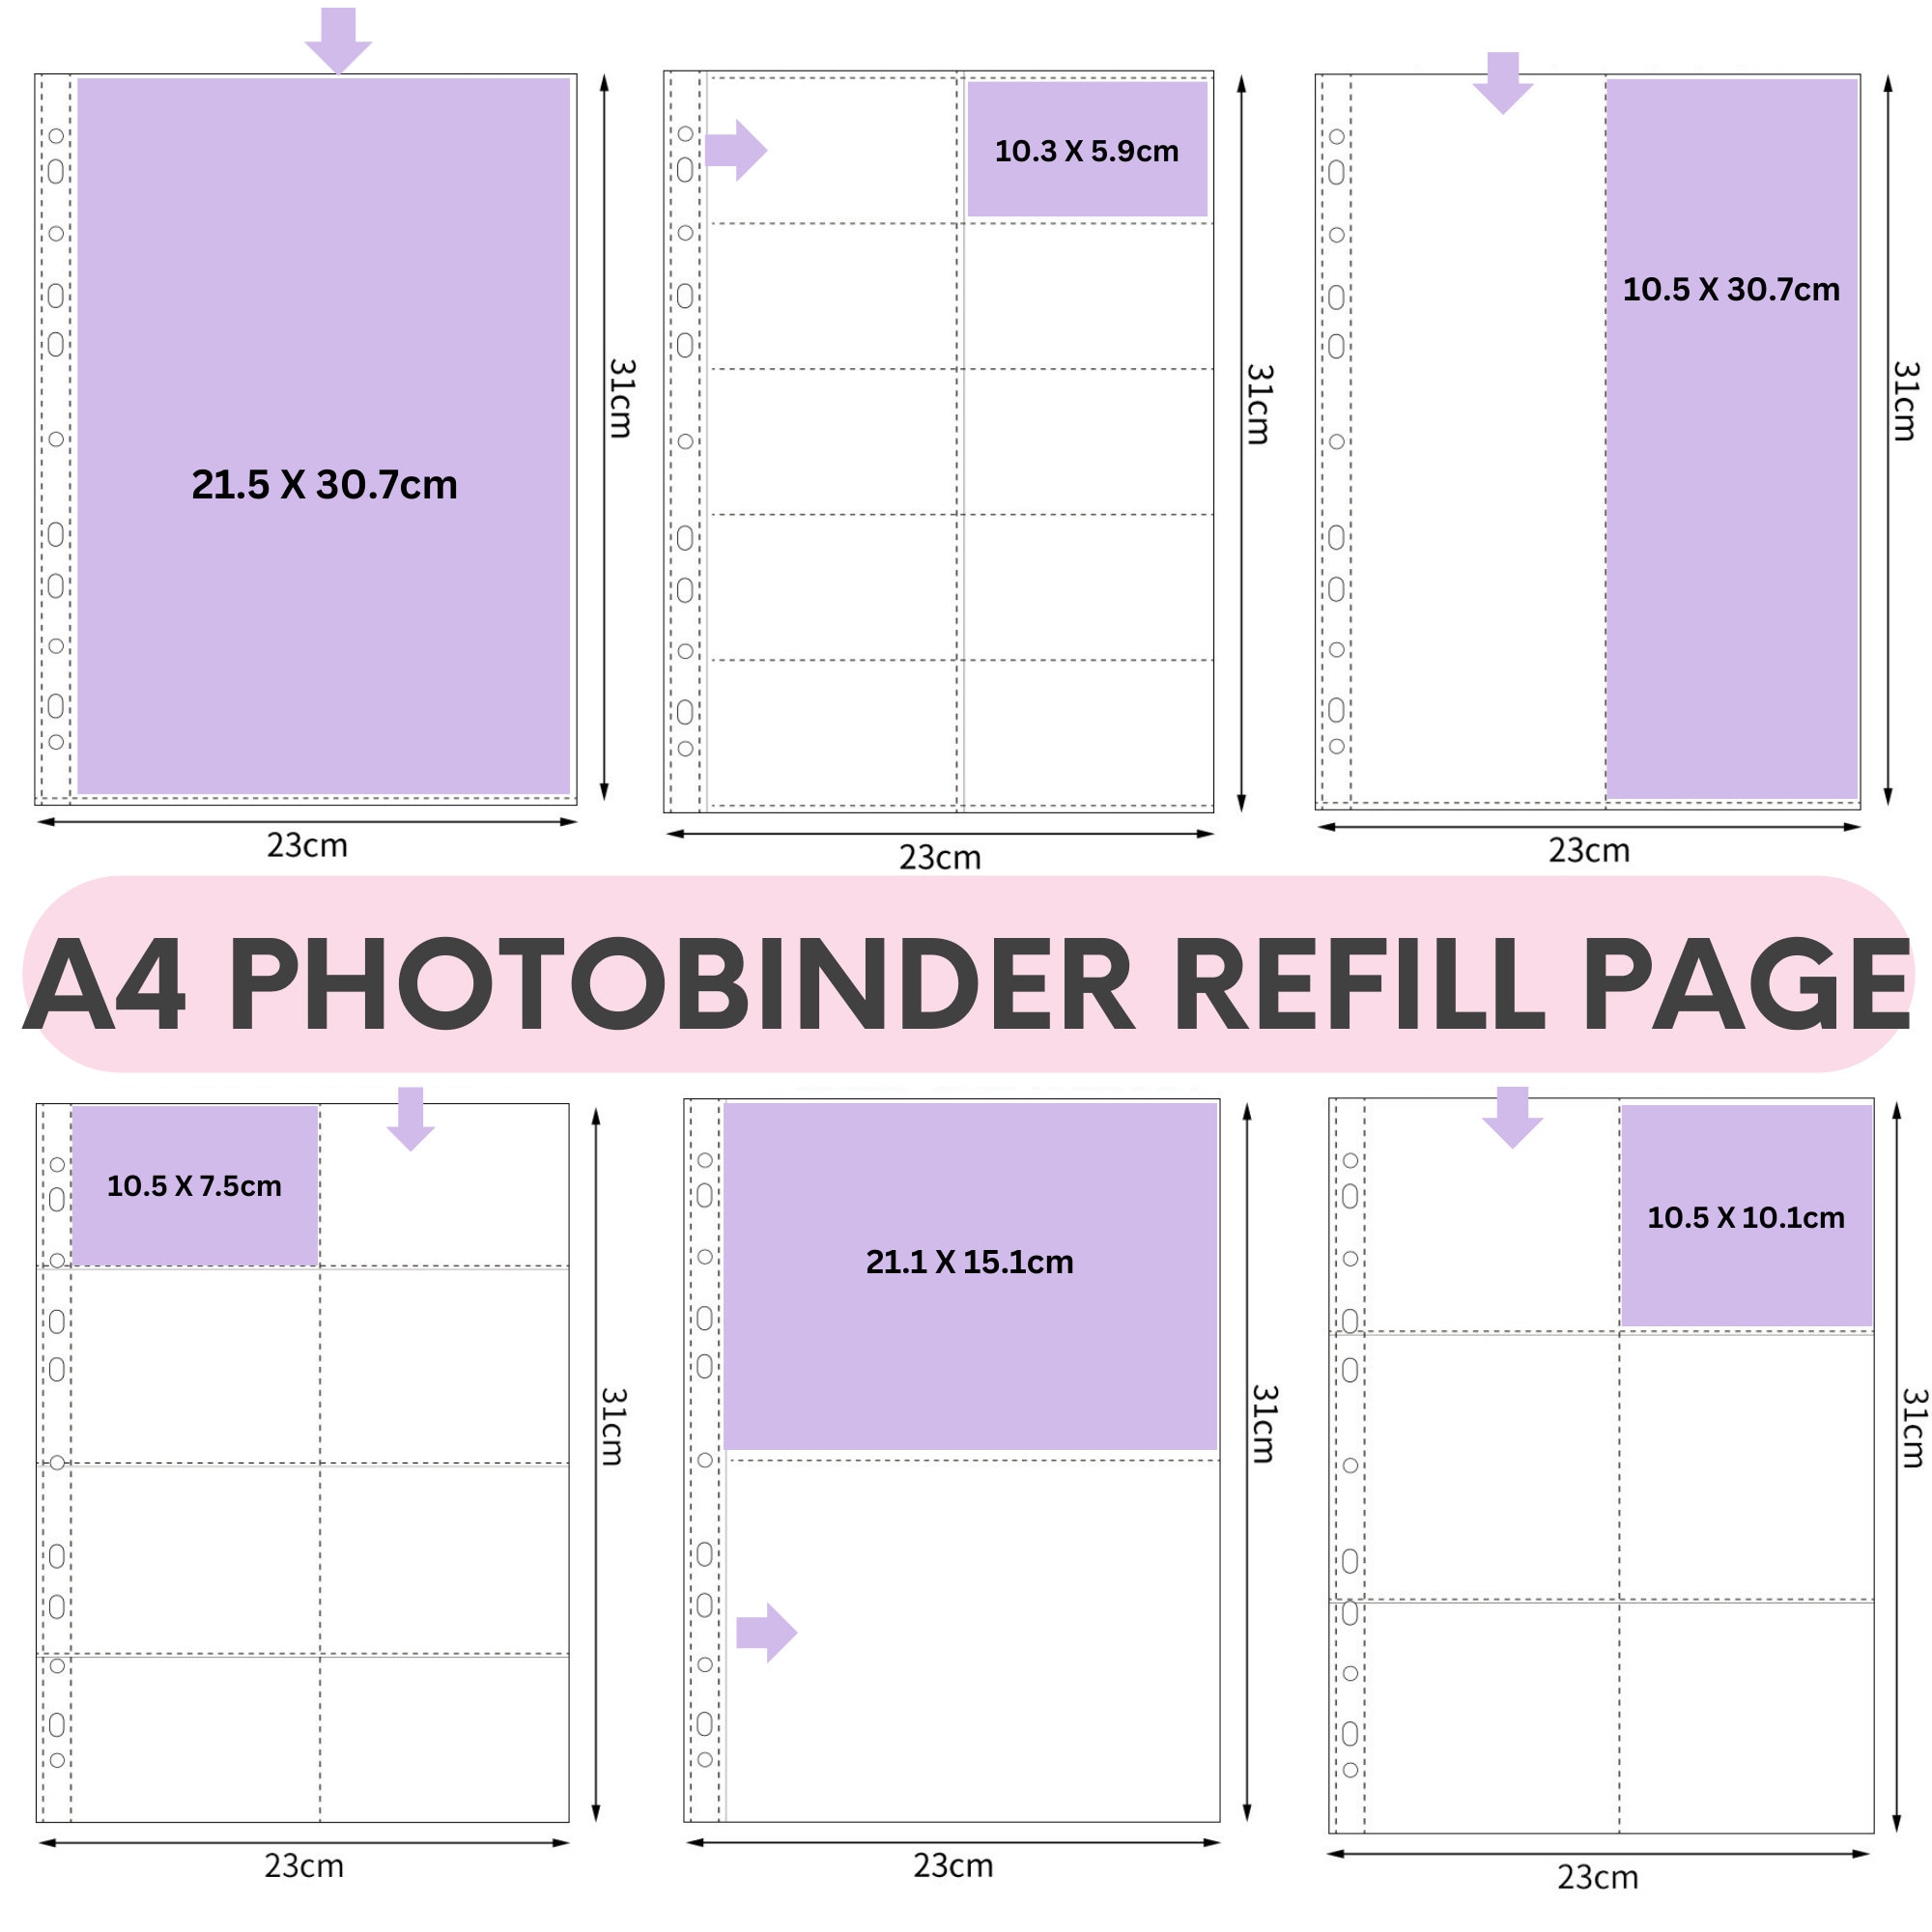  Dunwell 3-Ring Binder Sleeve Refills - (4x6 Mixed Format, 50  Pack) for 300 Pictures, Crystal Clear Photo Pockets, Photo Page Holds Six 4  x 6 Pictures, Photo Album Refillable Inserts : Office Products